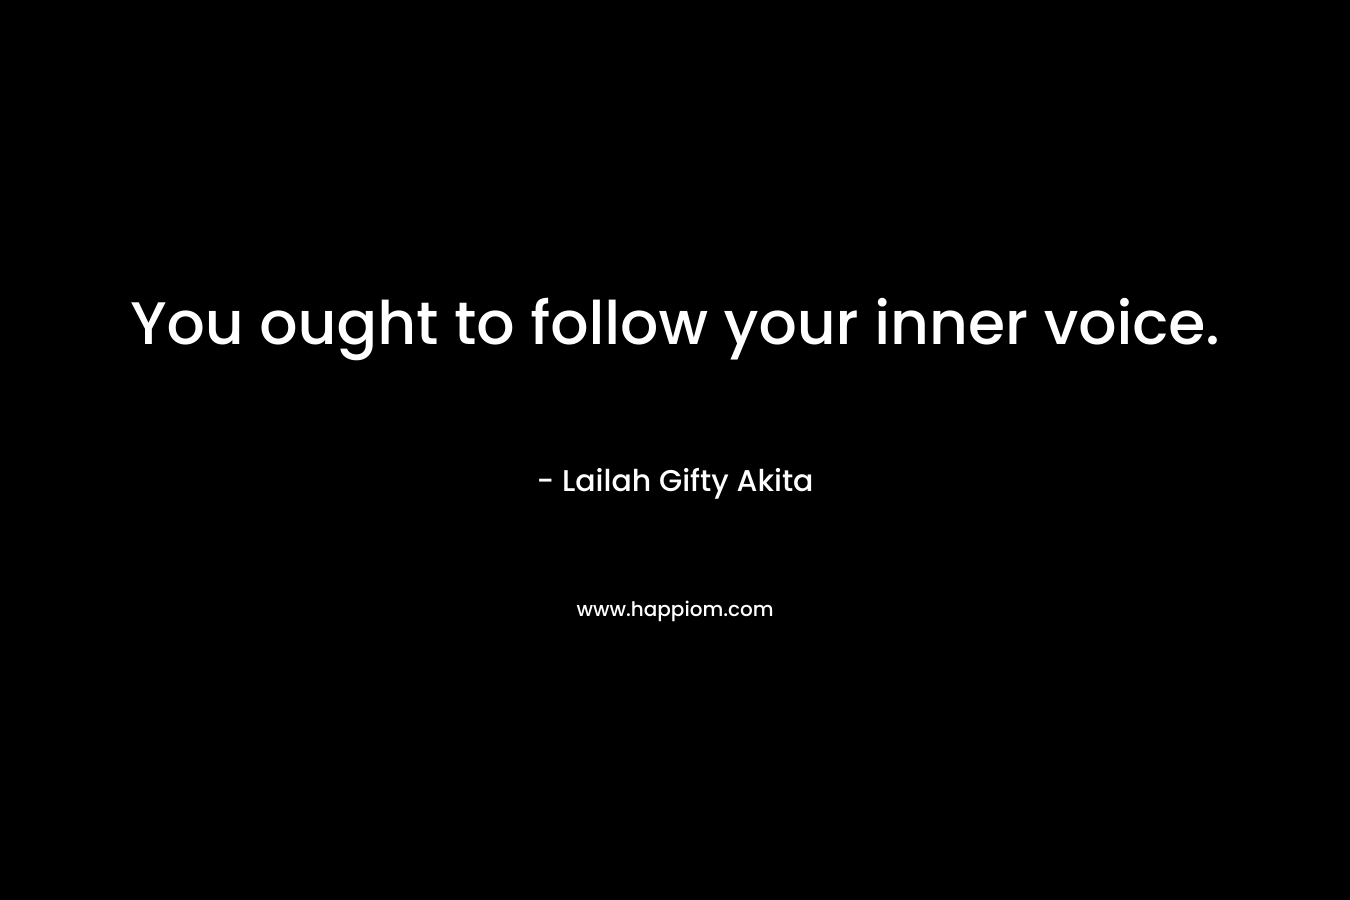 You ought to follow your inner voice.